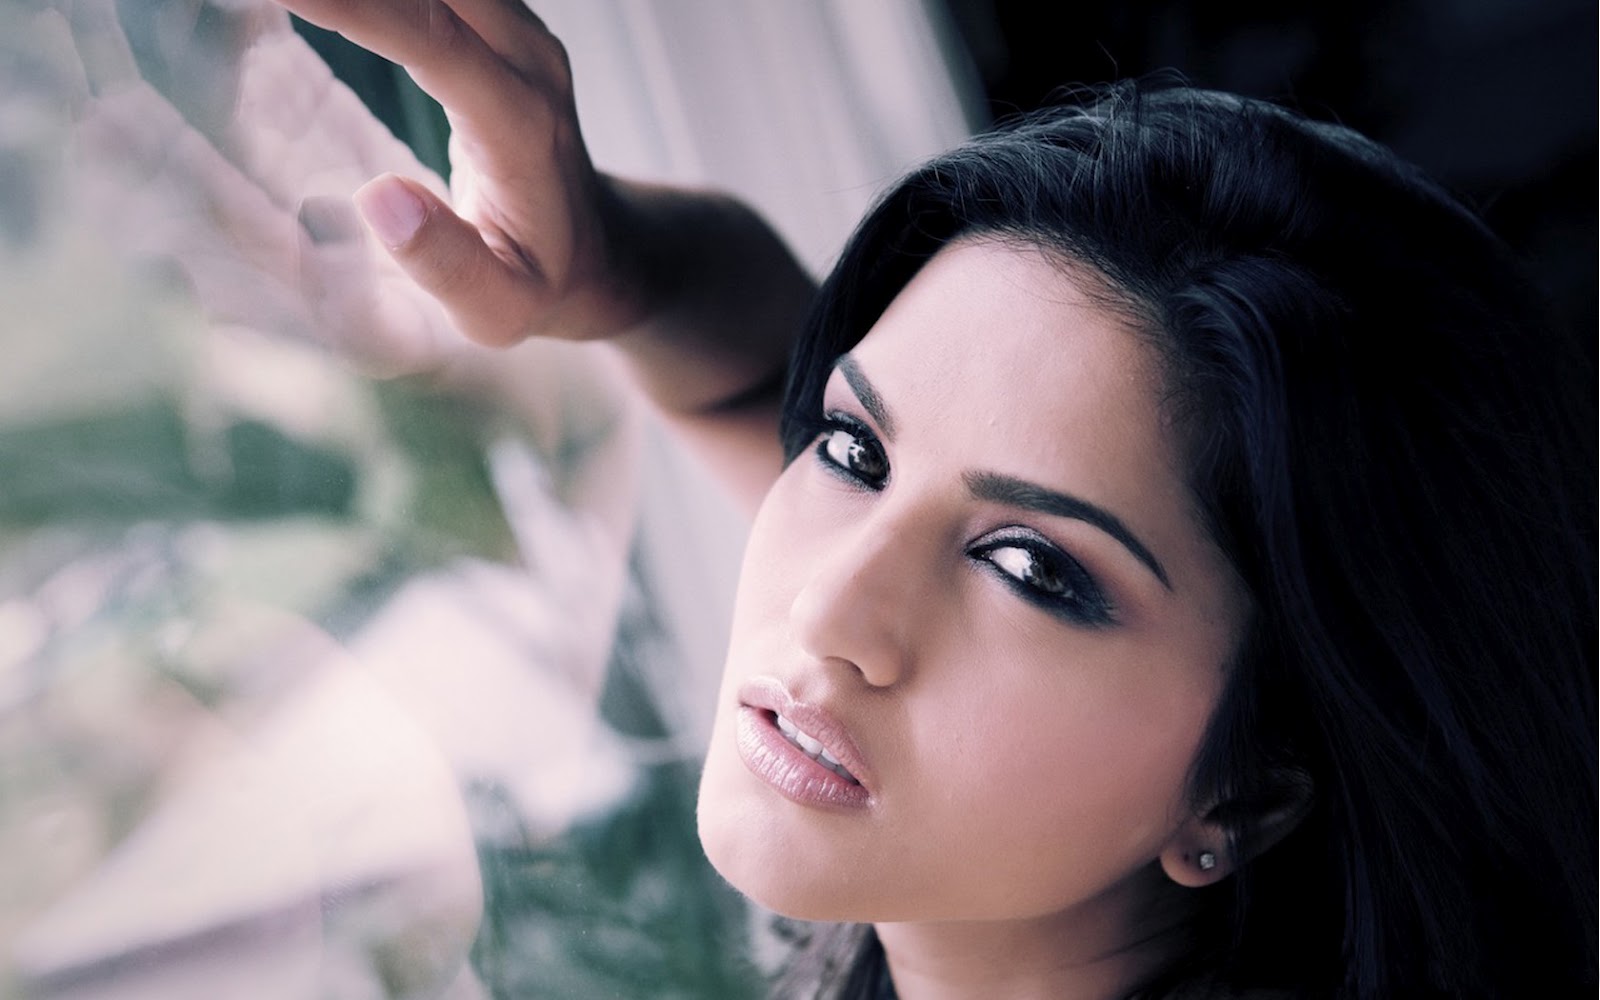 ... leone unseen wallpapers,sunny leone open wallpapers,sunny leone